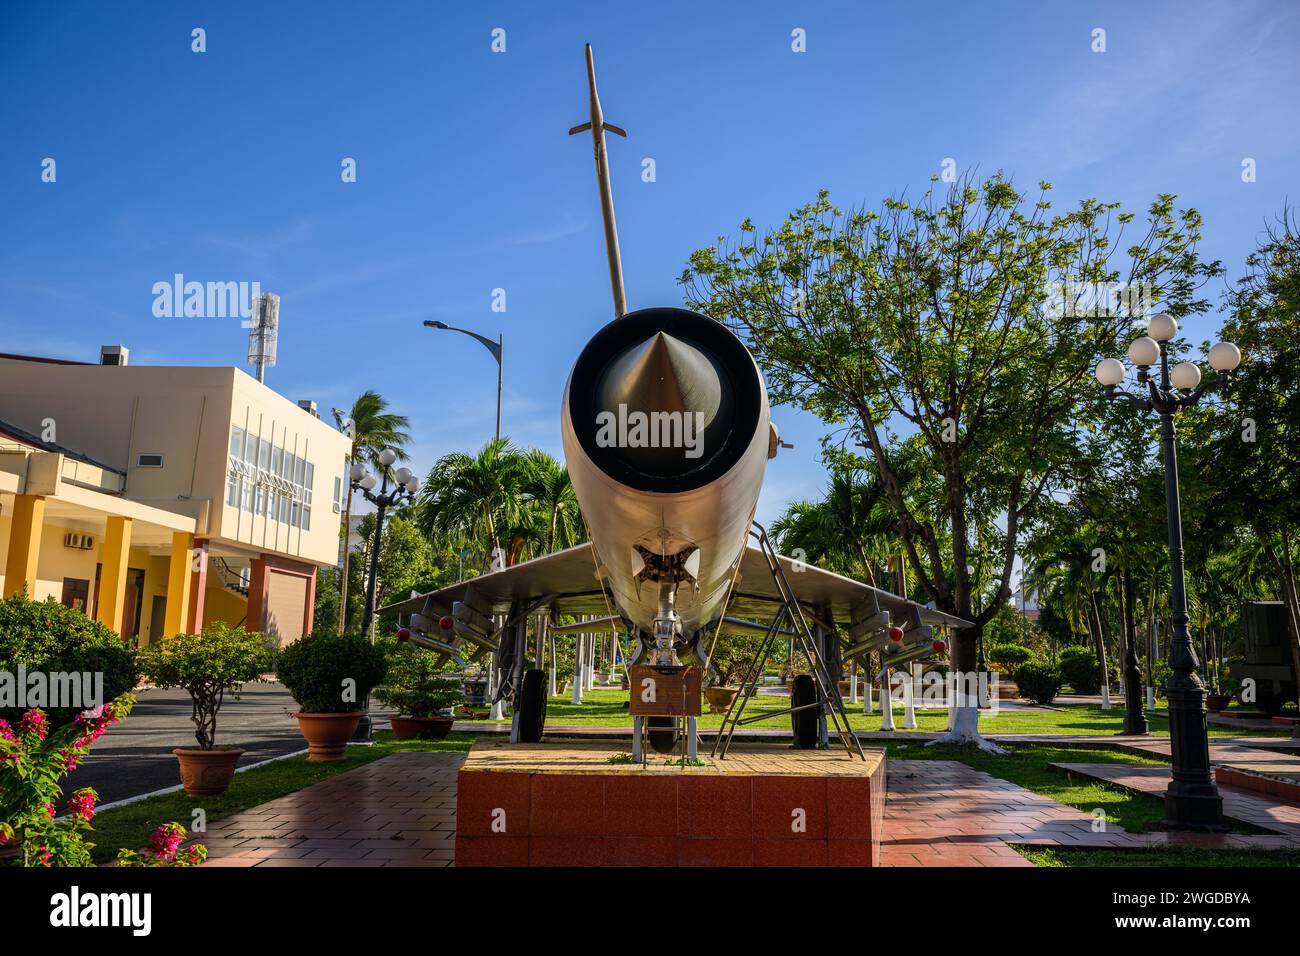 A Vietnamese Air Force MiG-21 fighter plane at the Ho Chi Minh Museum, Da Nang, Vietnam Stock Photo